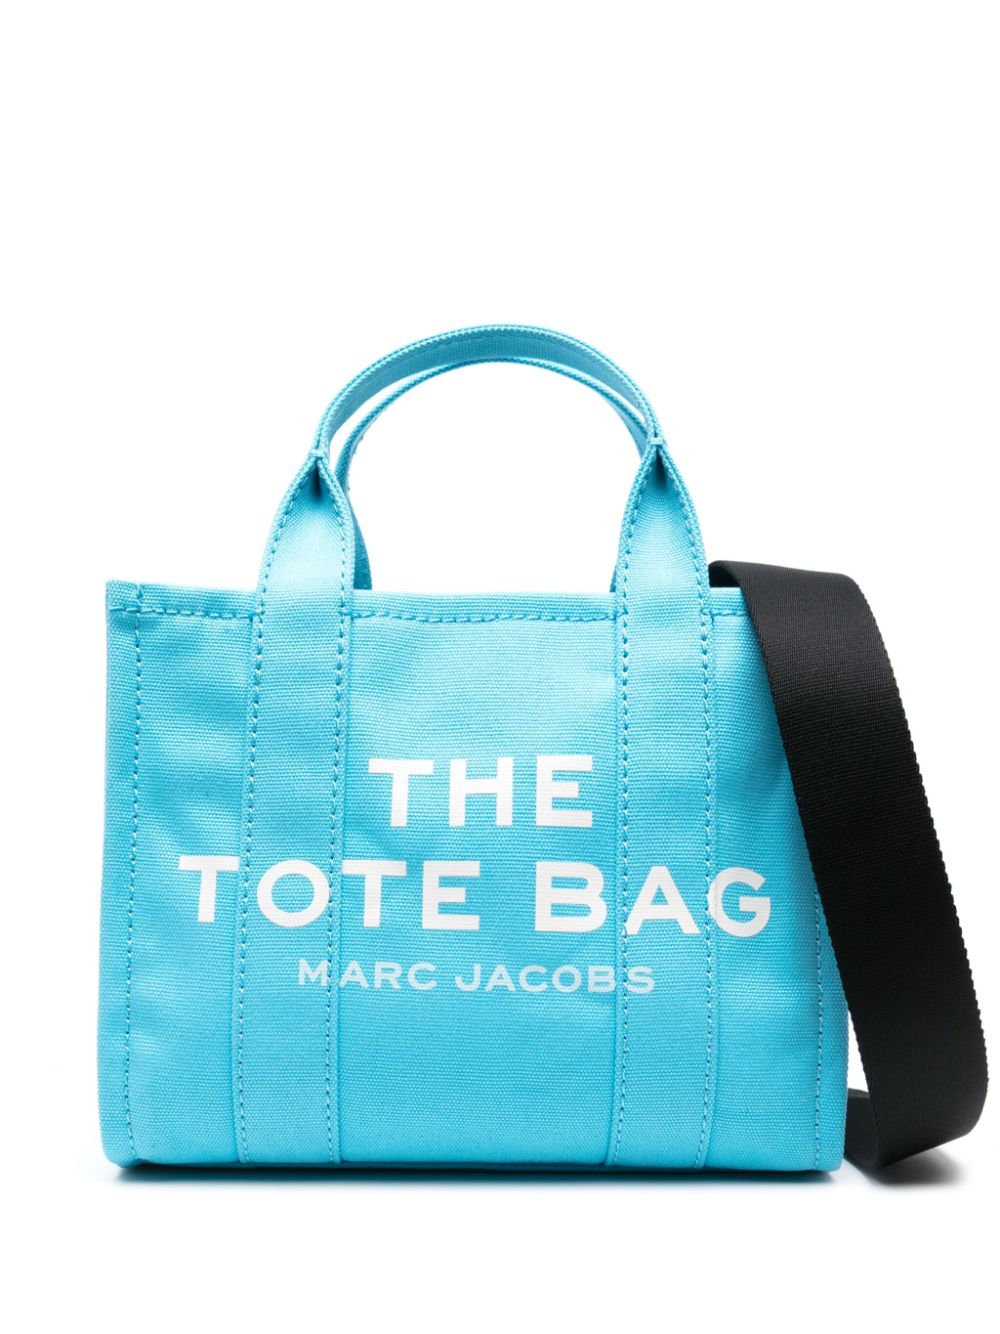 Marc Jacobs The Small Canvas Tote Bag In 470 - Aqua